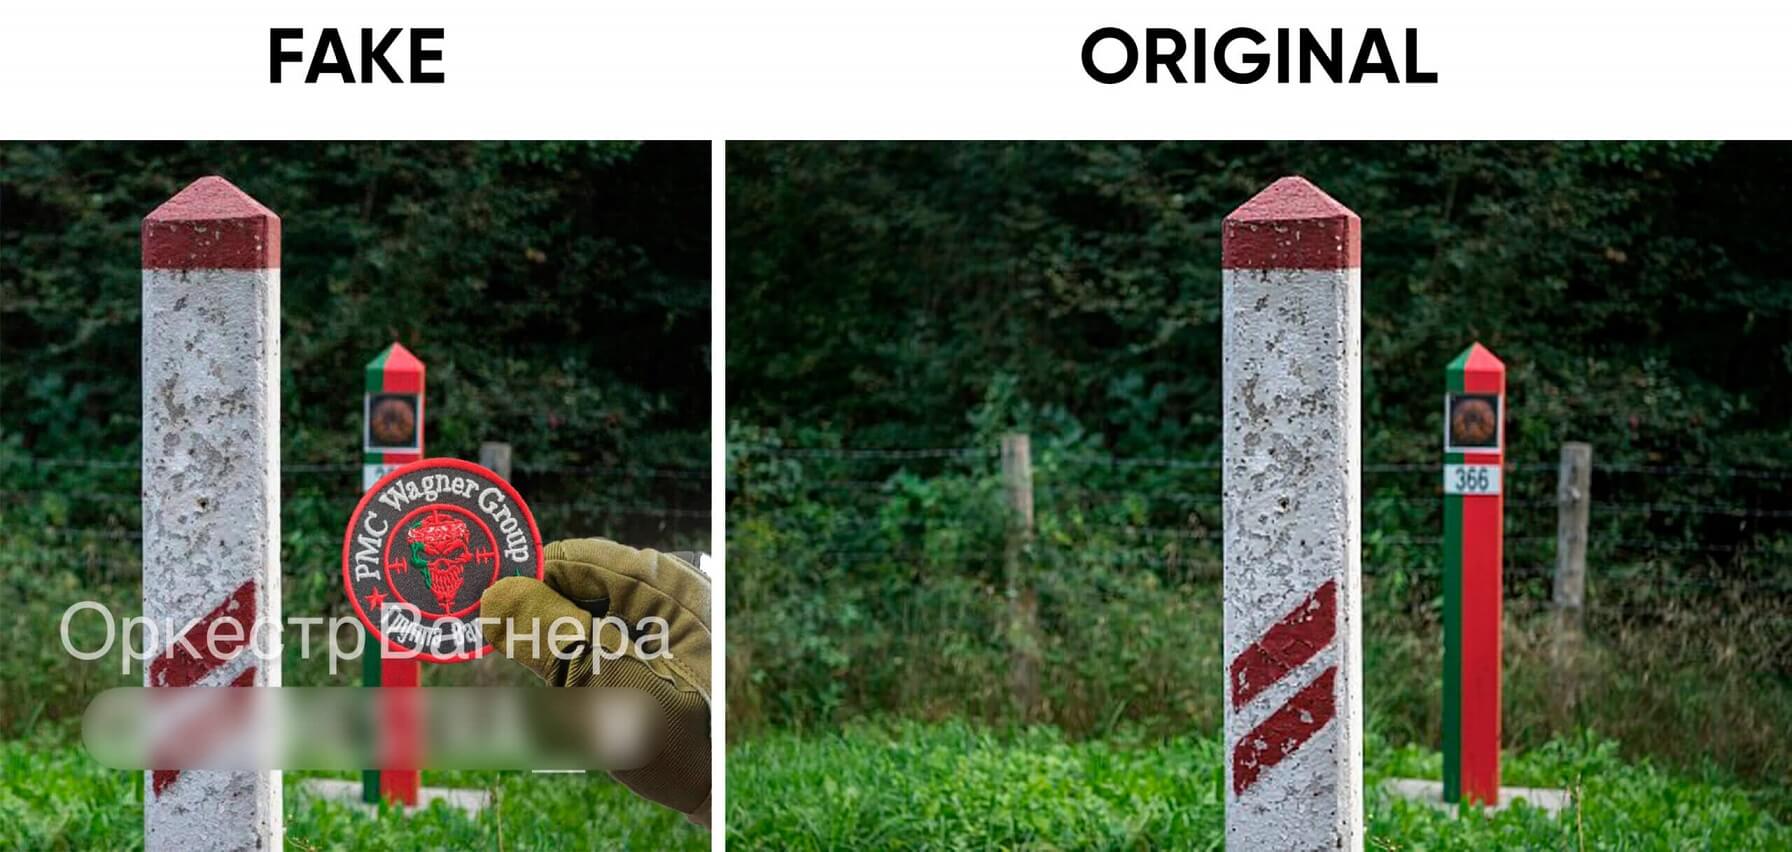 A fake and an original photo on the Belarus-Latvia border